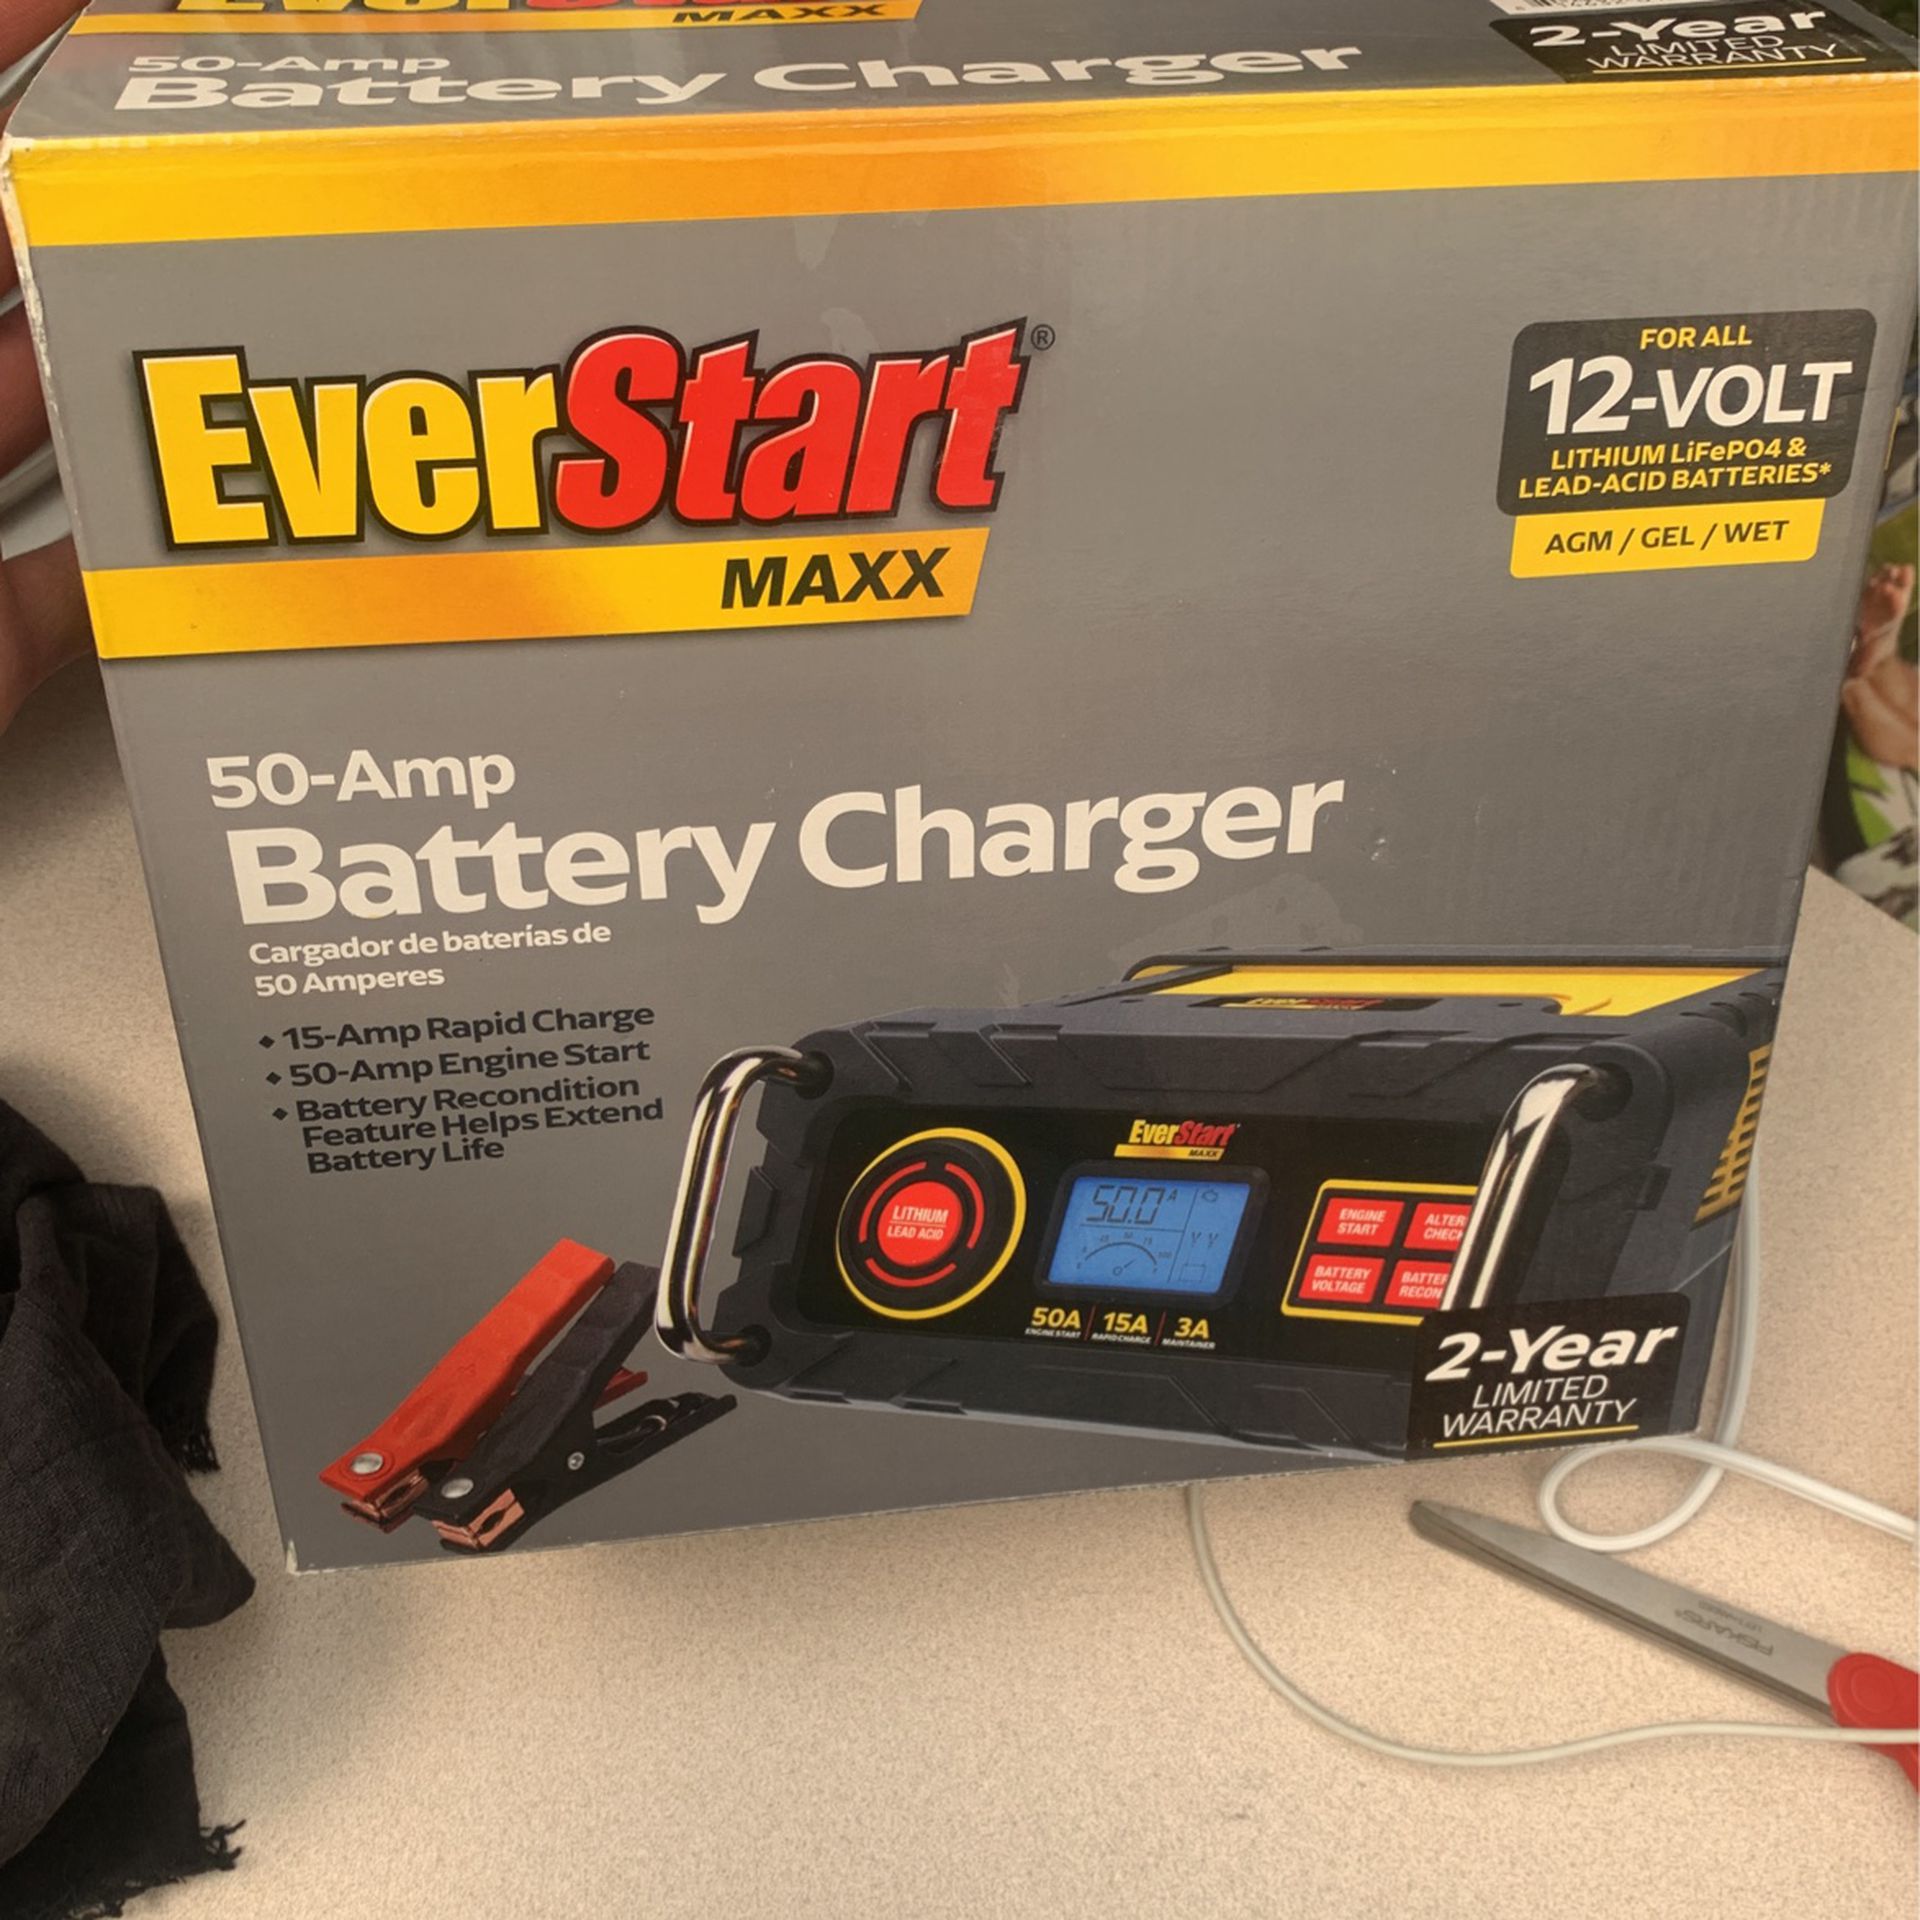 Everstart Maxx 15 Amp Automotive Battery Charger with 50 Amp Engine Start (BC50BE)-New